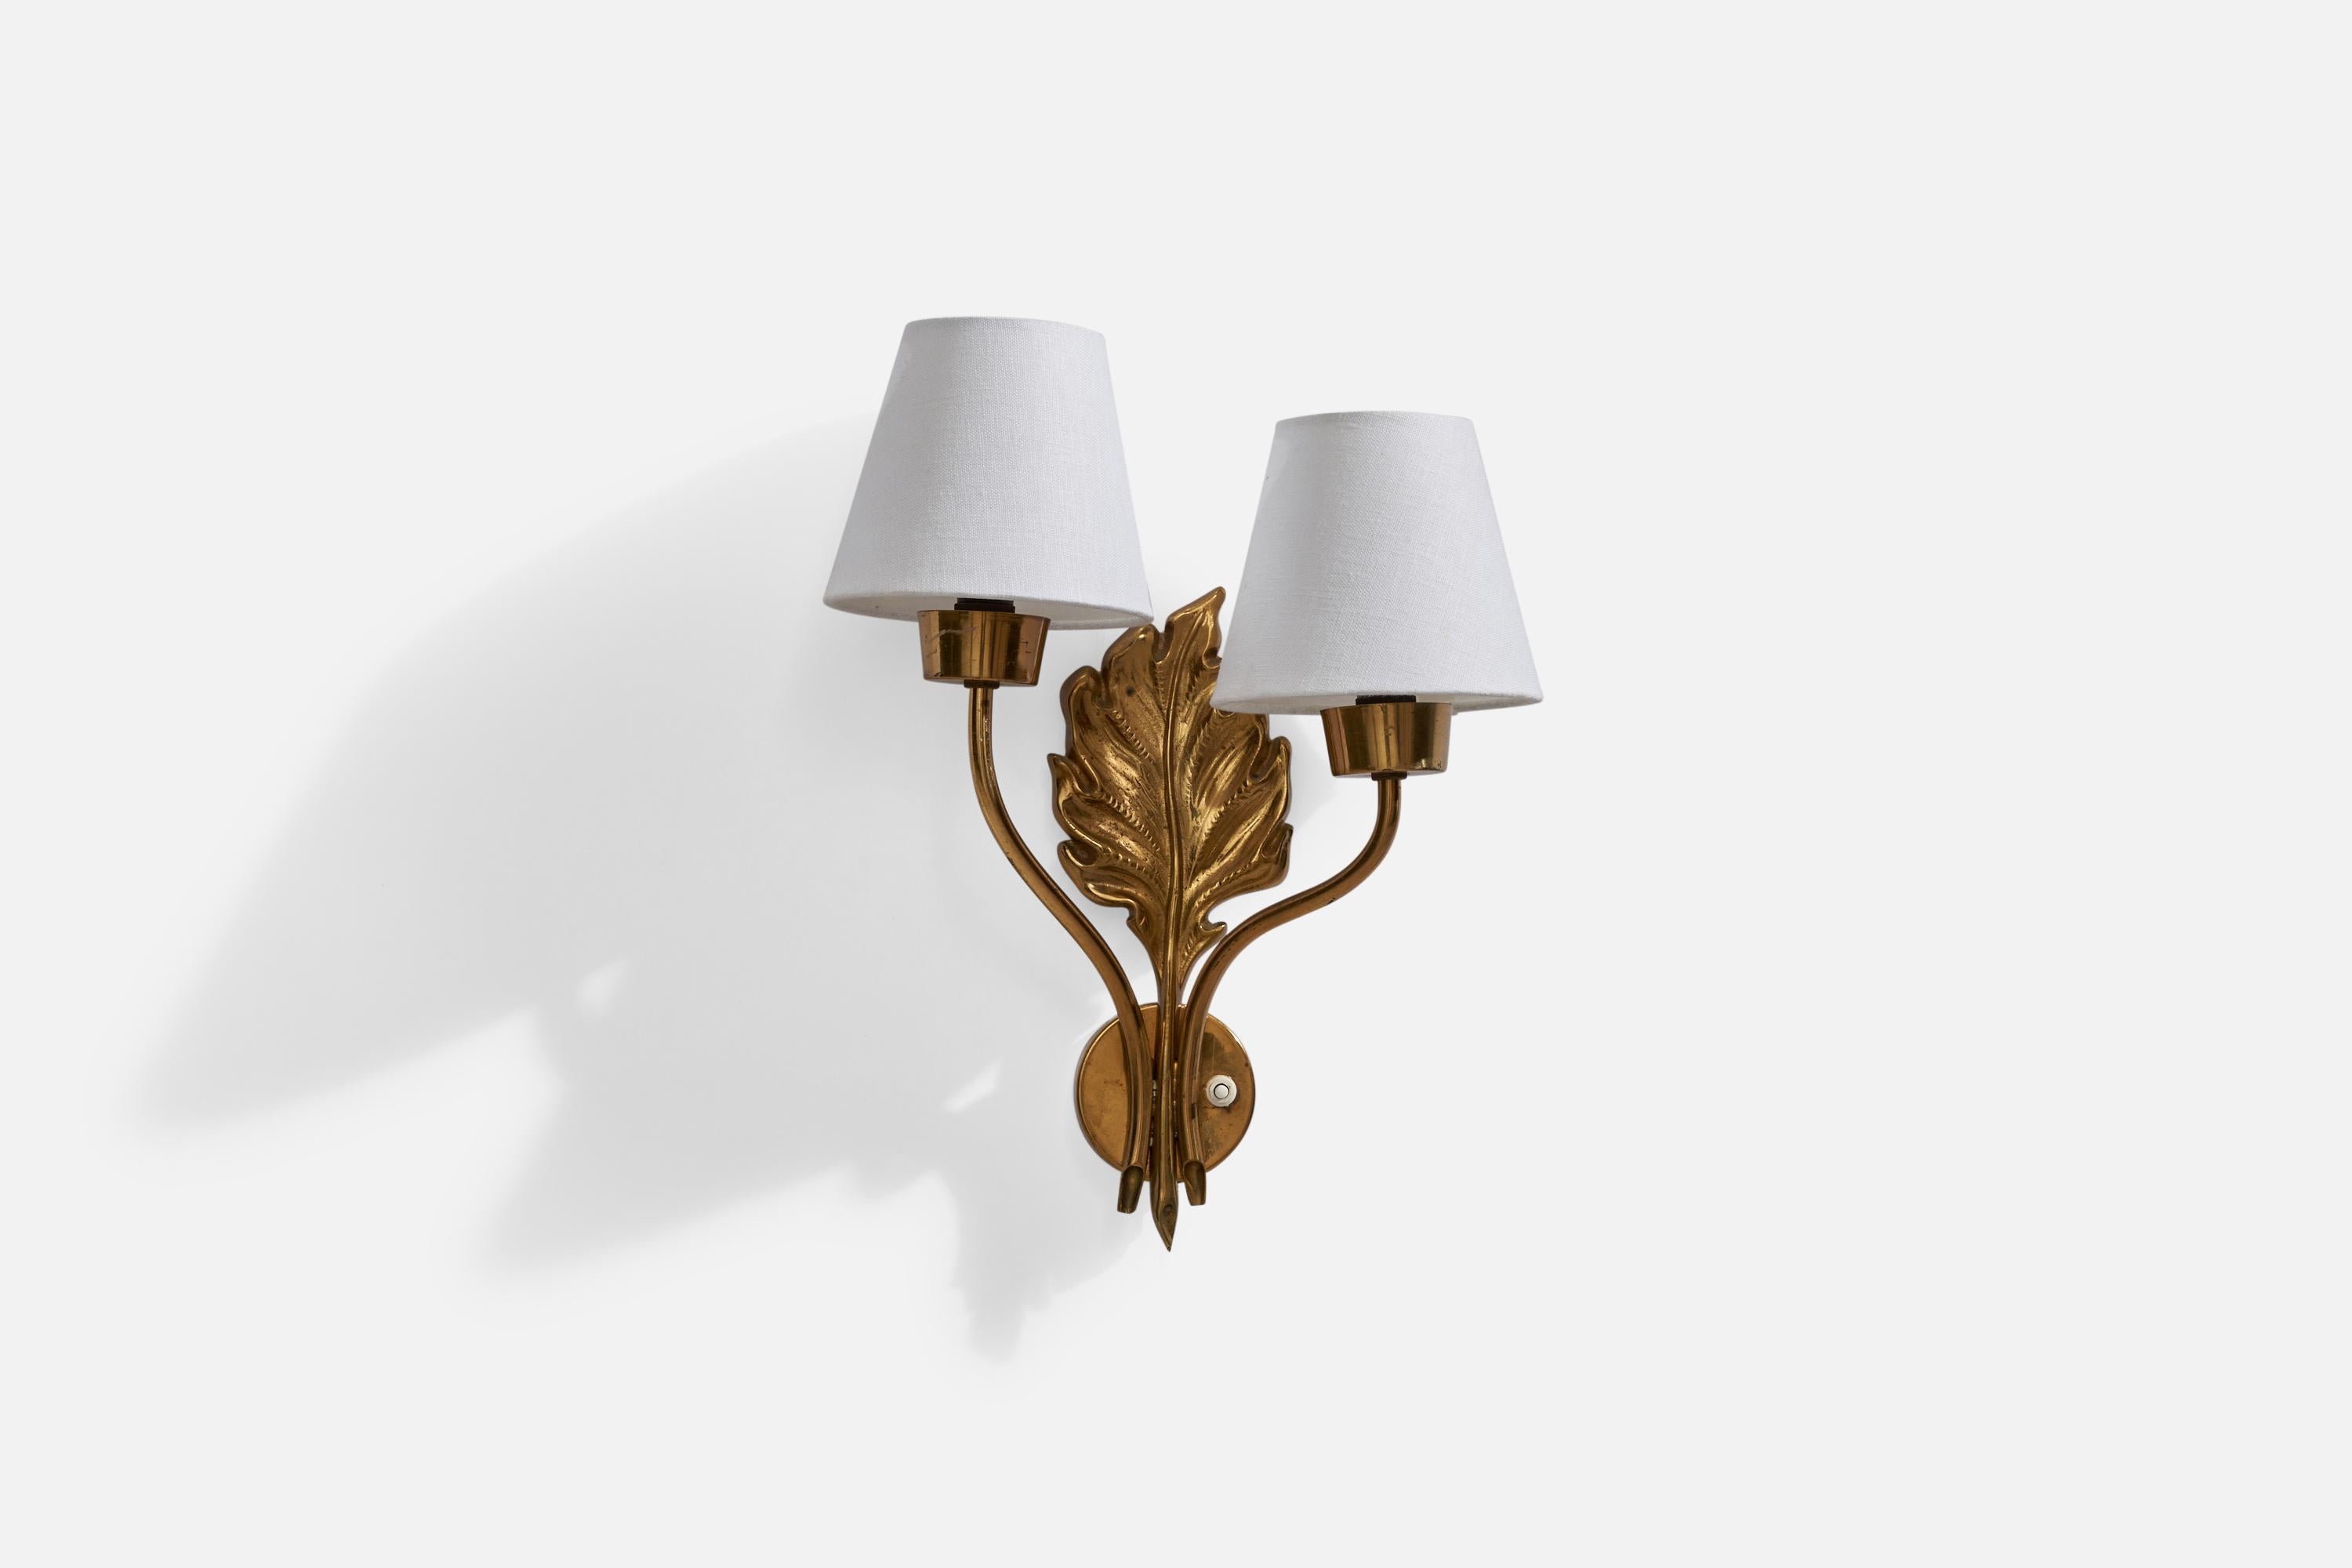 A two-armed brass and white fabric wall light designed and produced in Sweden, 1940s.

Overall Dimensions (inches): 14.5” H x 11.5”  W x 5.75” D
Back Plate Dimensions (inches): 2.75” H x 2.75” W x .75” D
Bulb Specifications: E-14Bulb
Number of